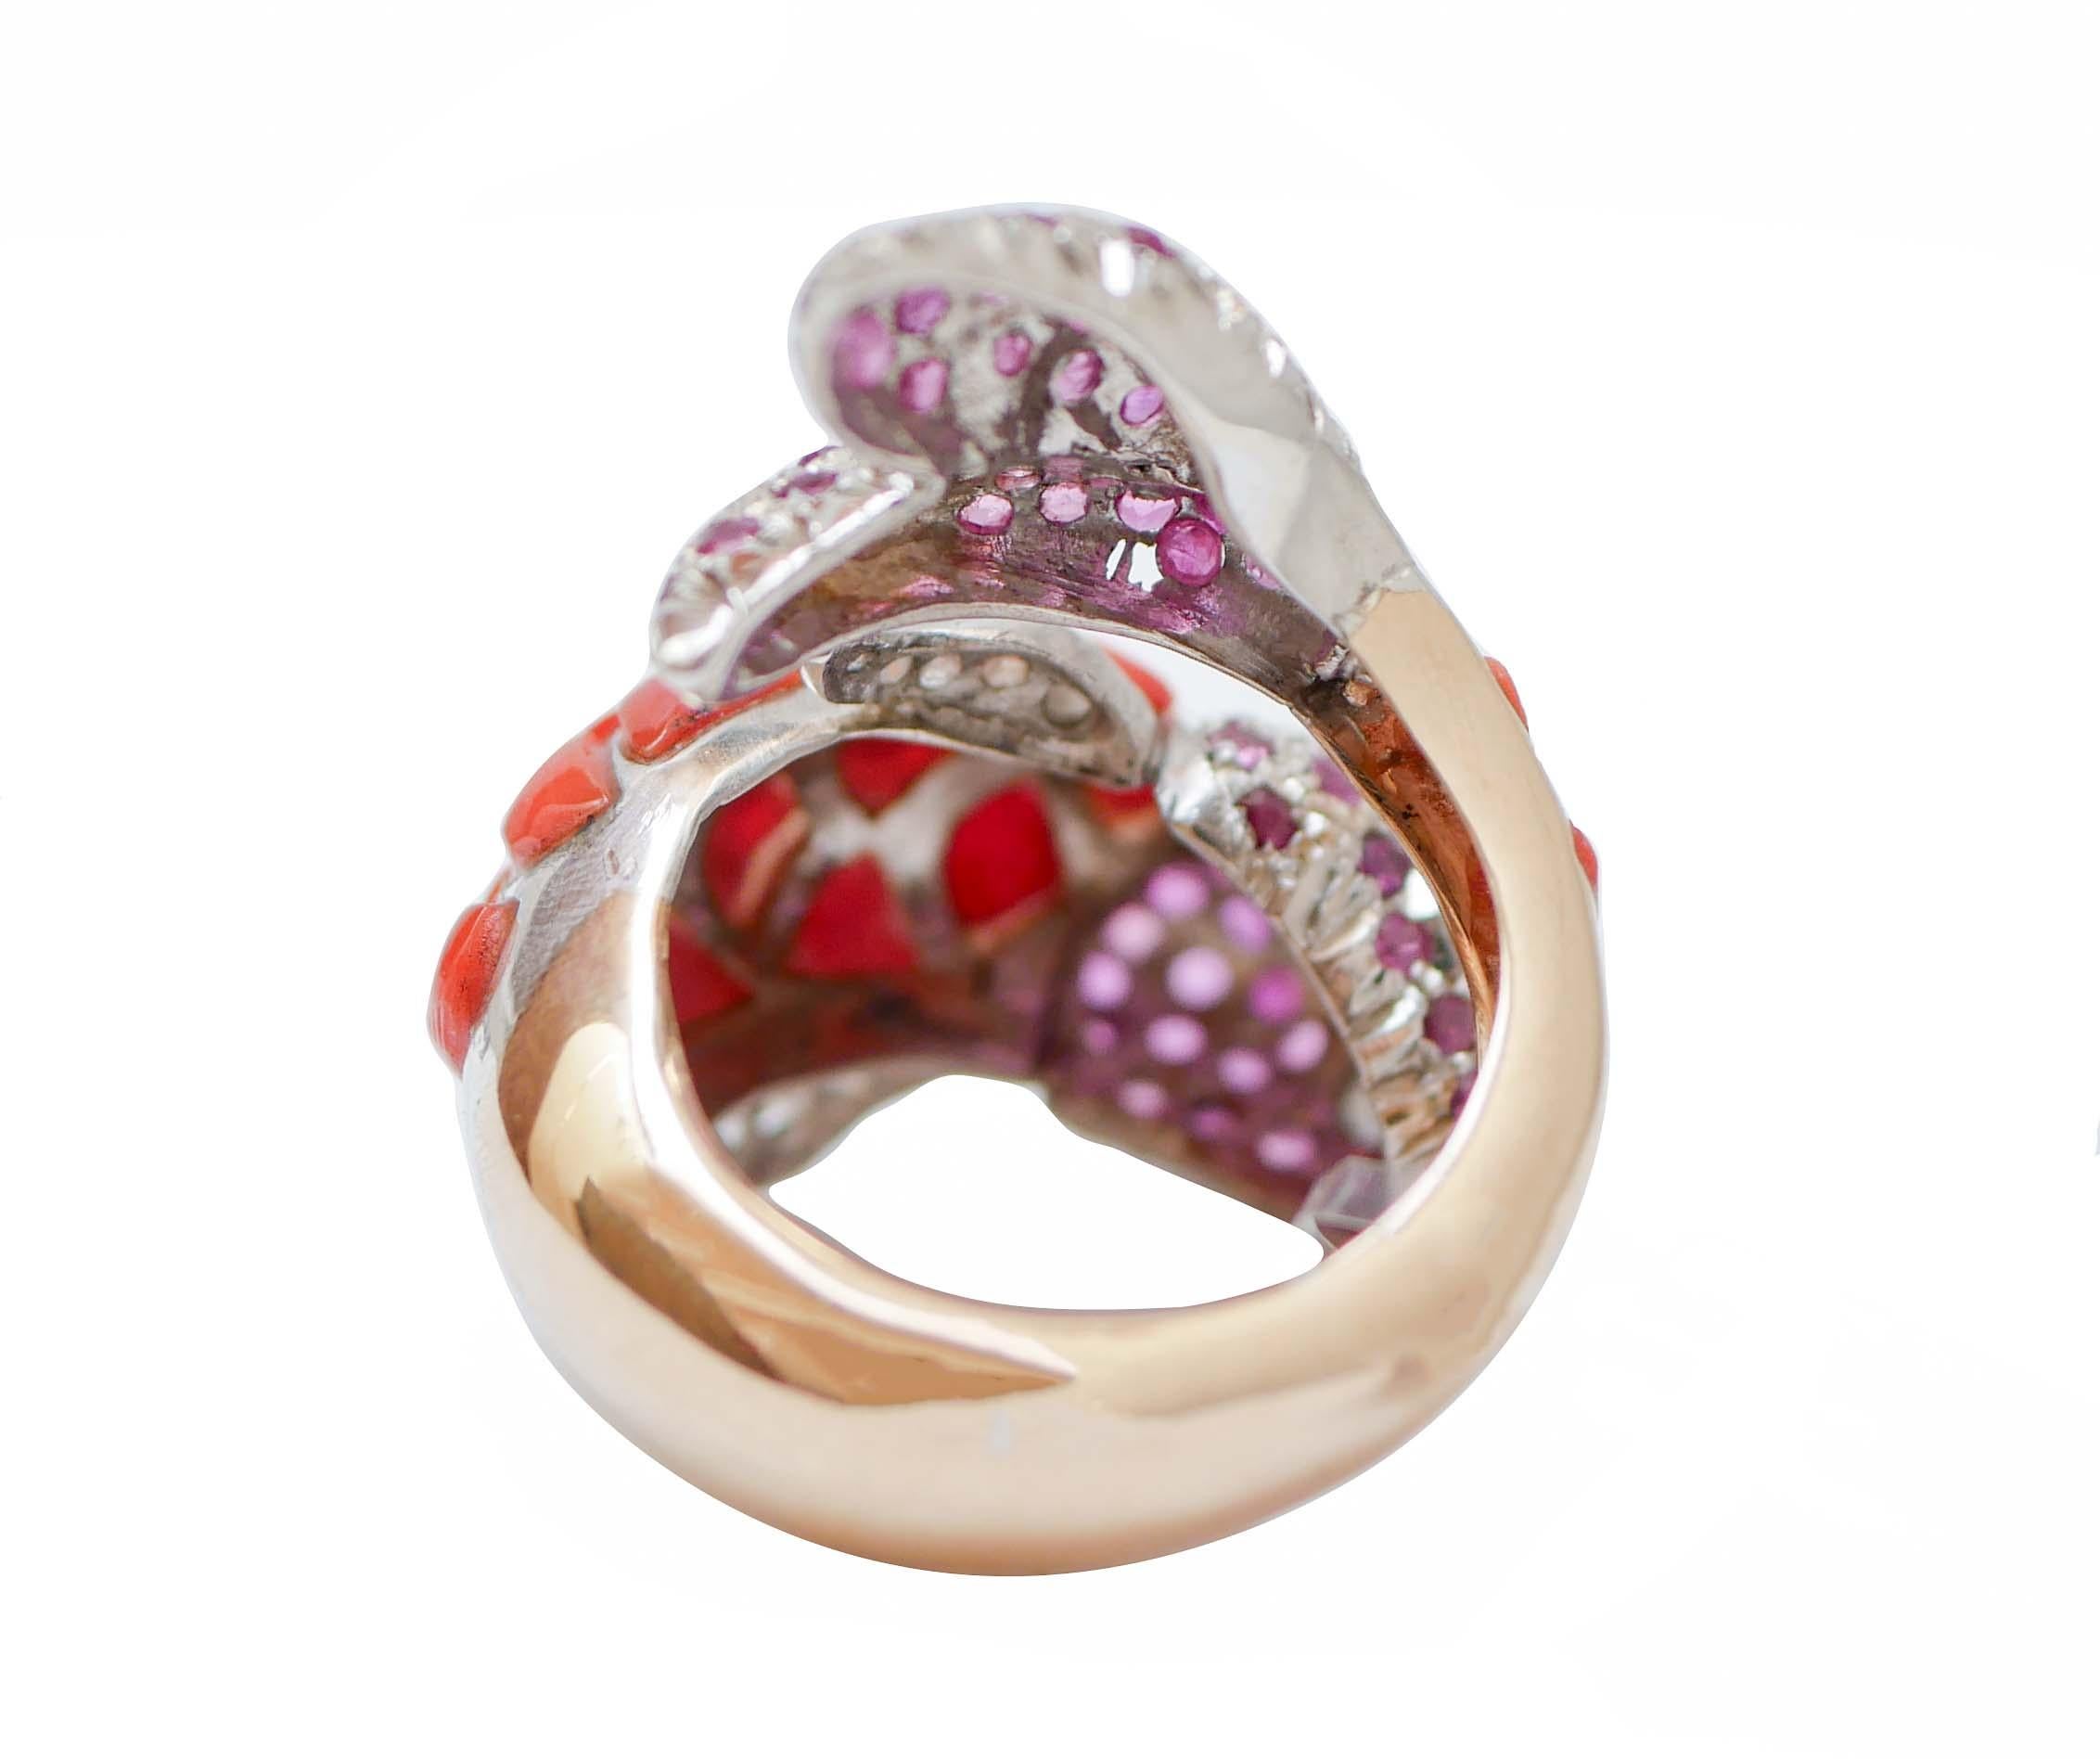 Retro Corals, Rubies, Diamonds, Rose Gold and Silver Fish Shape Ring. For Sale